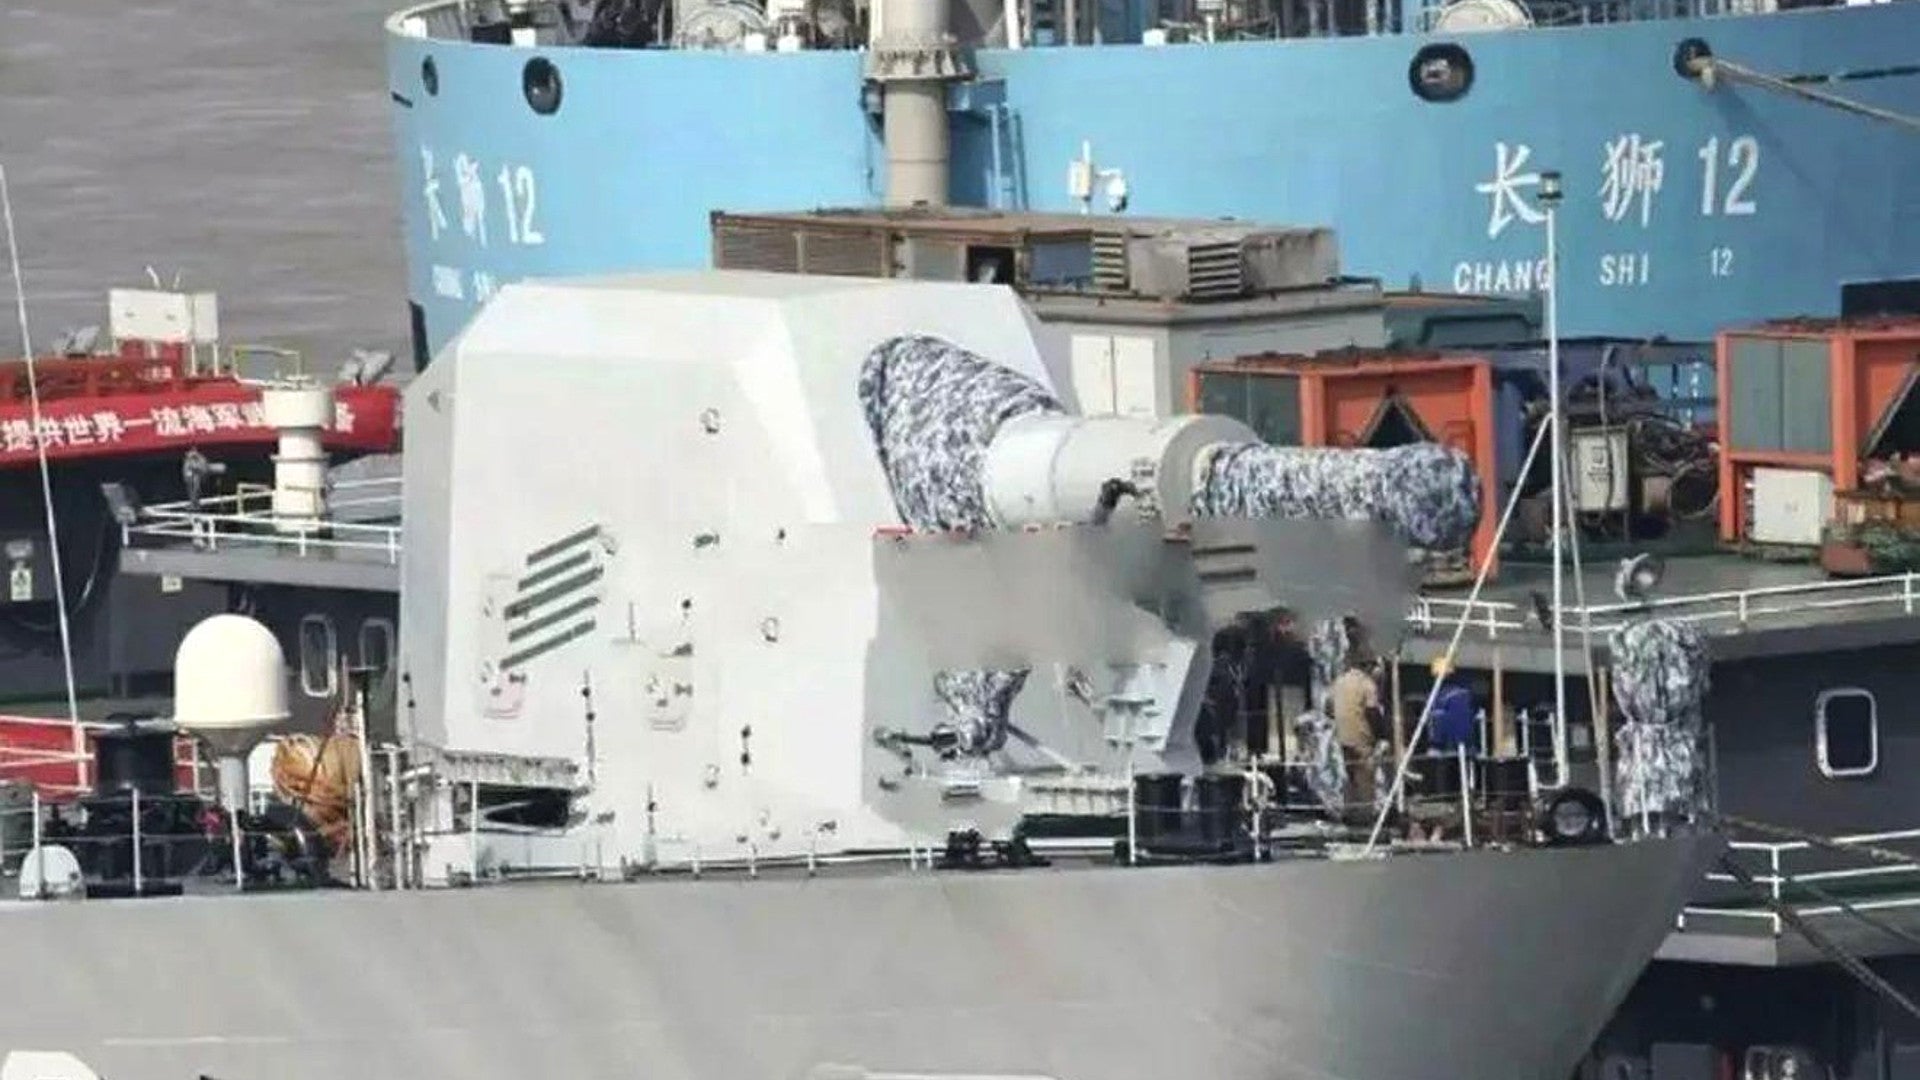 U.S. Intel Says China To Have Railgun-Armed Ships By 2025